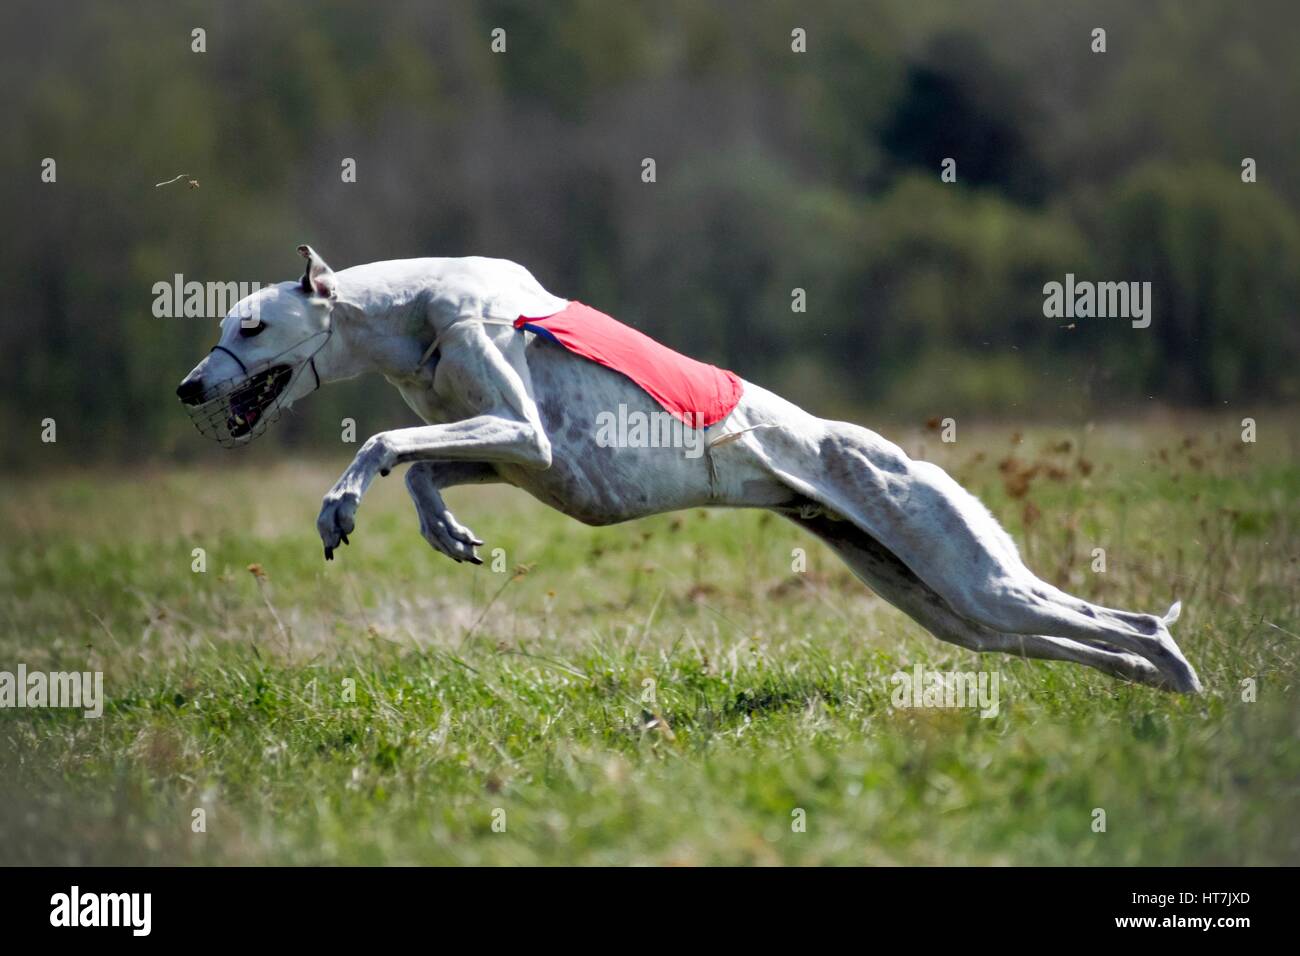 Close-up Of A White Russian Wolfhound Dog Running Stock Photo